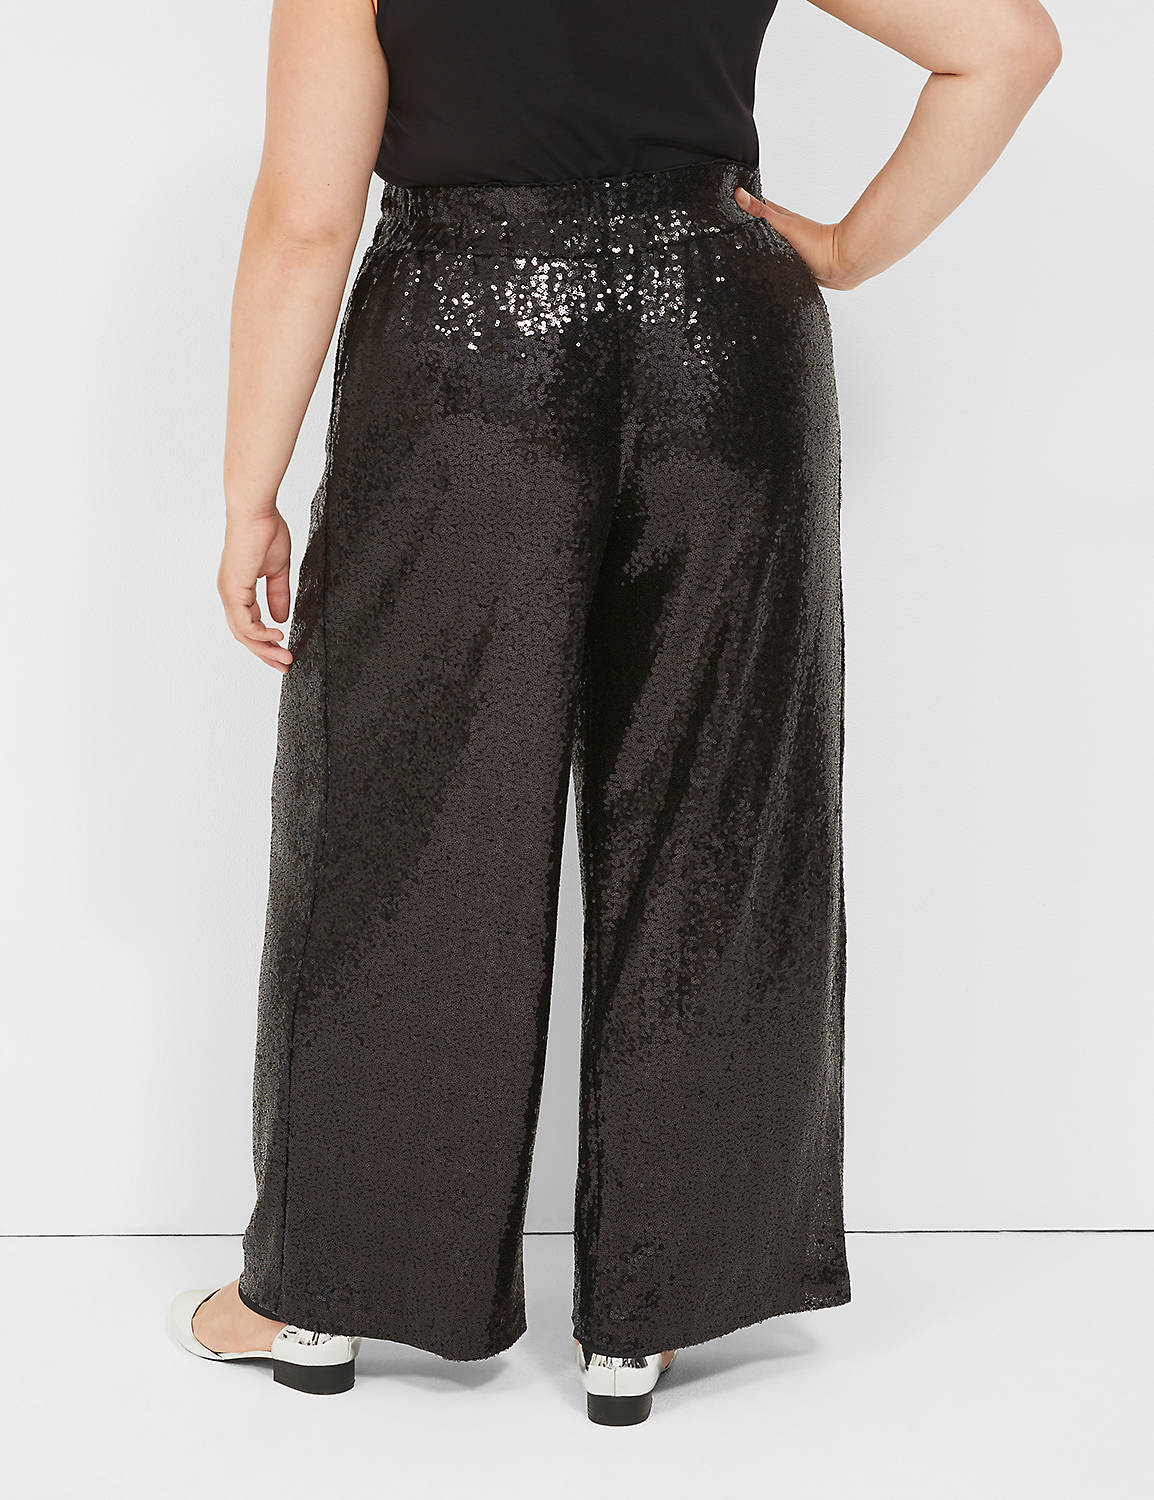 THE SEQUIN WIDELEG 1137887 Product Image 2